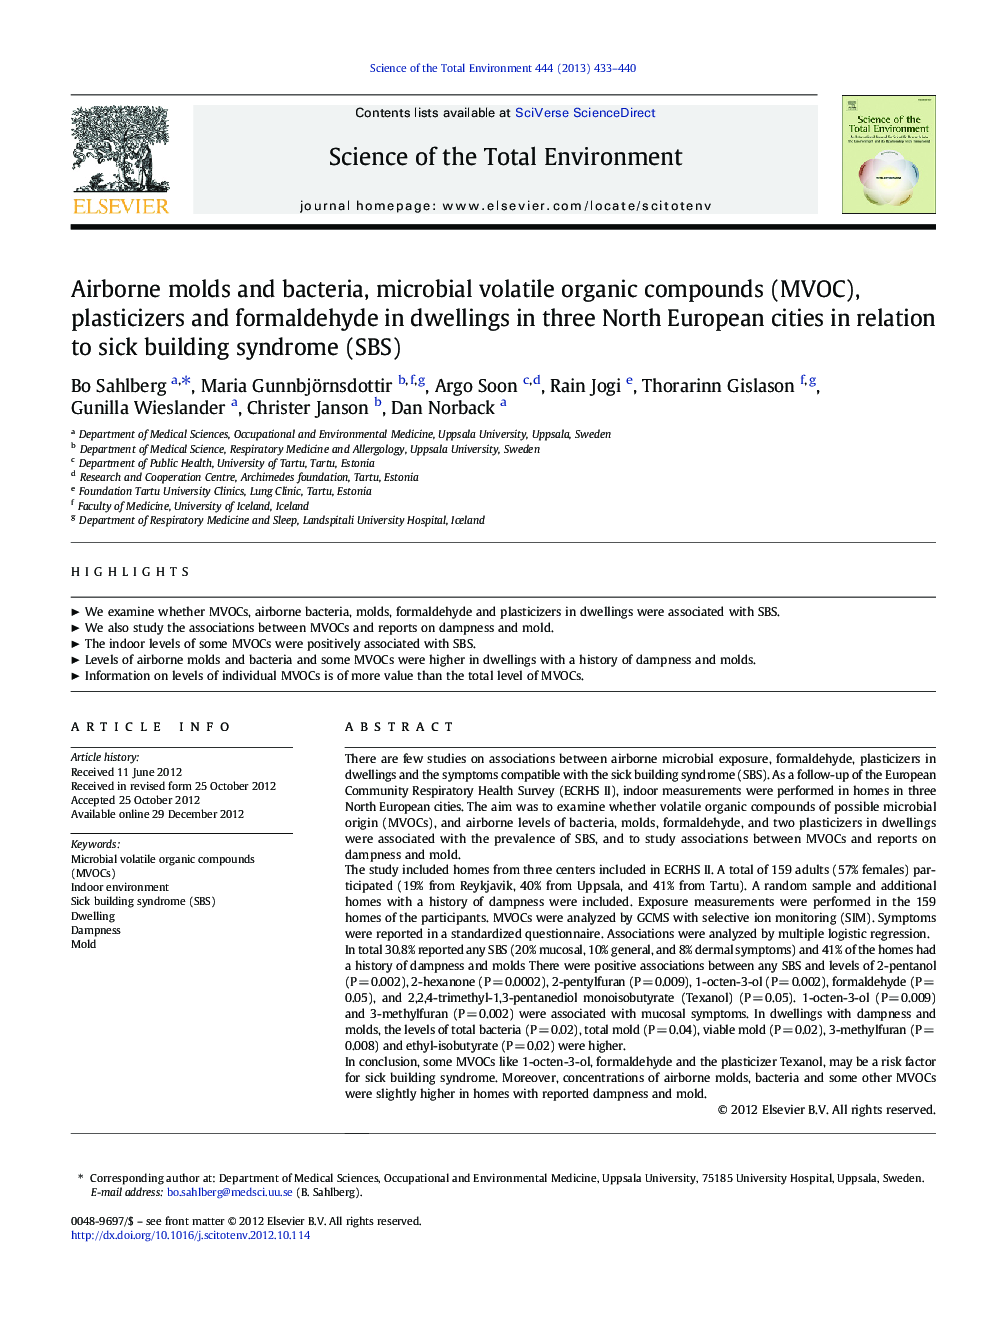 Airborne molds and bacteria, microbial volatile organic compounds (MVOC), plasticizers and formaldehyde in dwellings in three North European cities in relation to sick building syndrome (SBS)